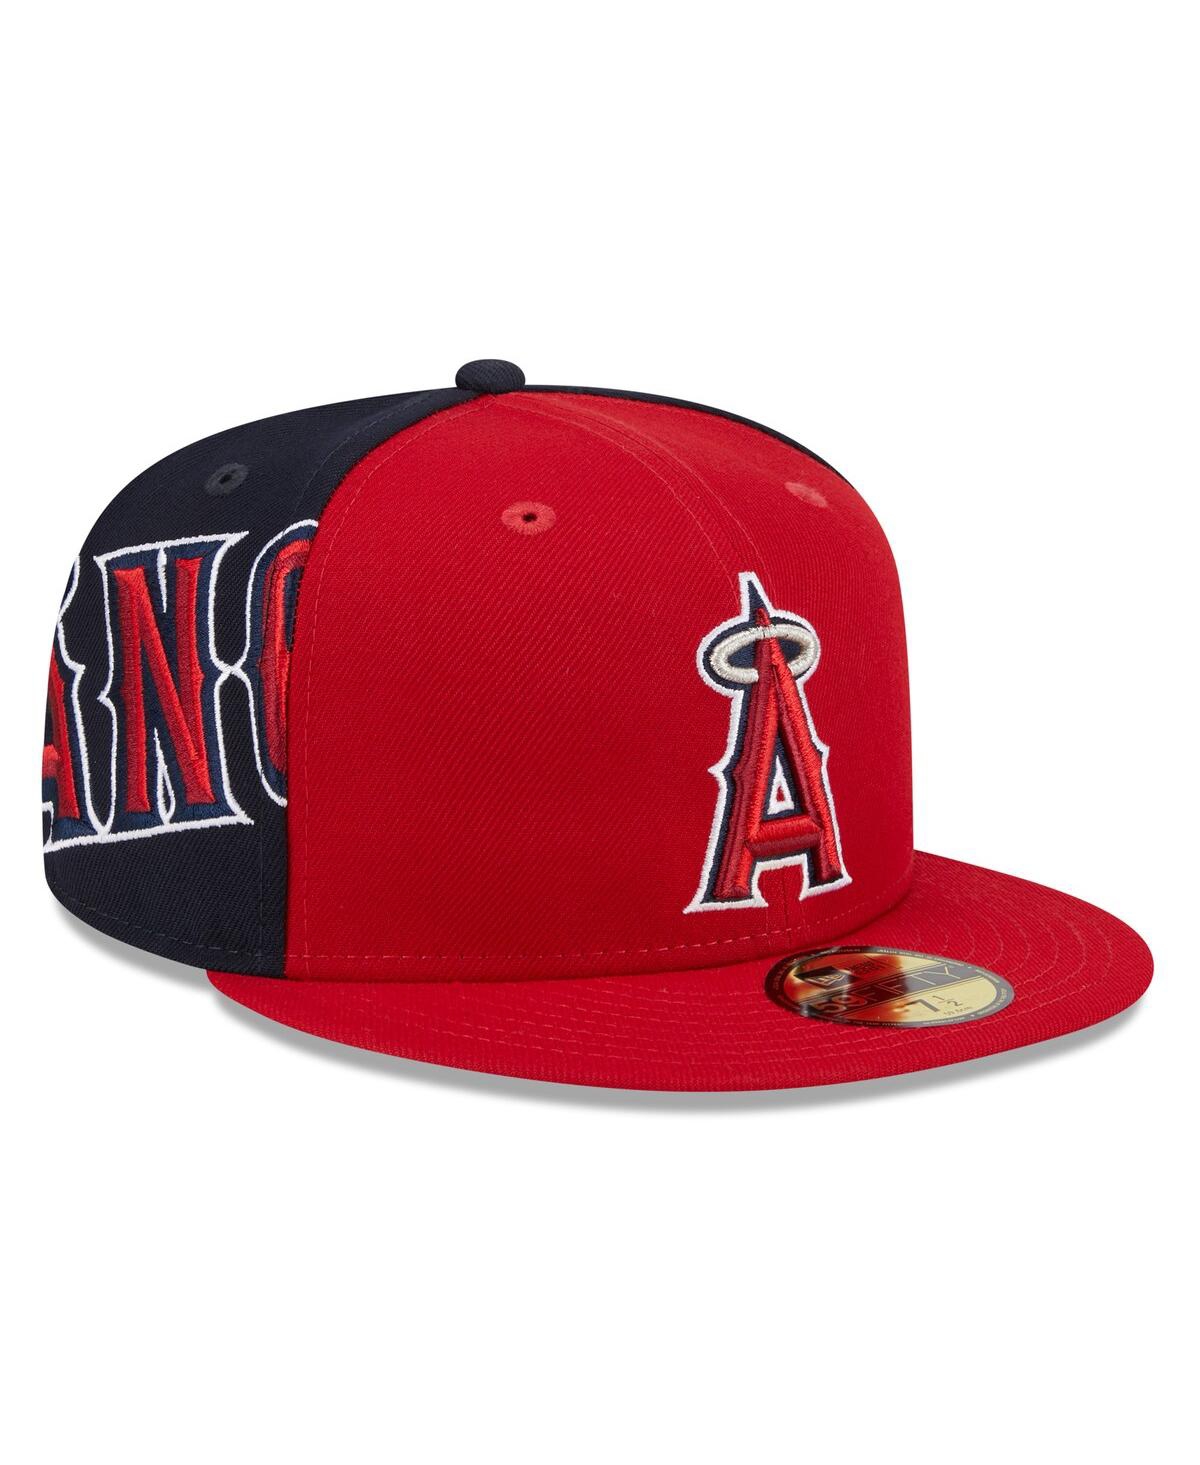 Men's Red/Navy Los Angeles Angels Gameday Sideswipe 59fifty Fitted Hat - Red Navy